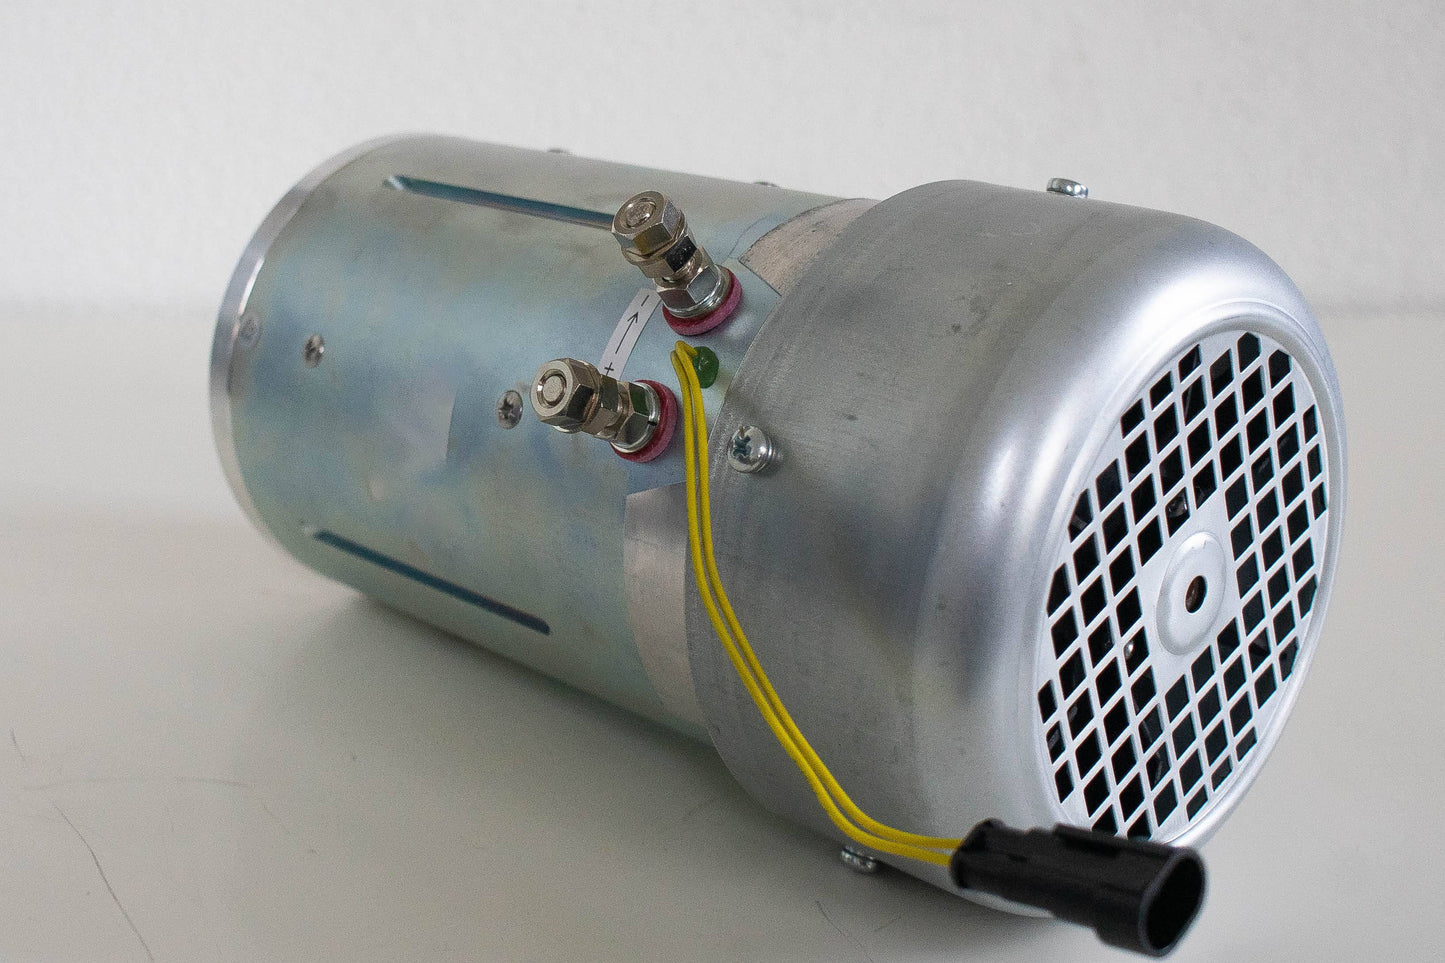 Quiet and Vibration-Free 1100W Electric Motor (1800rpm)